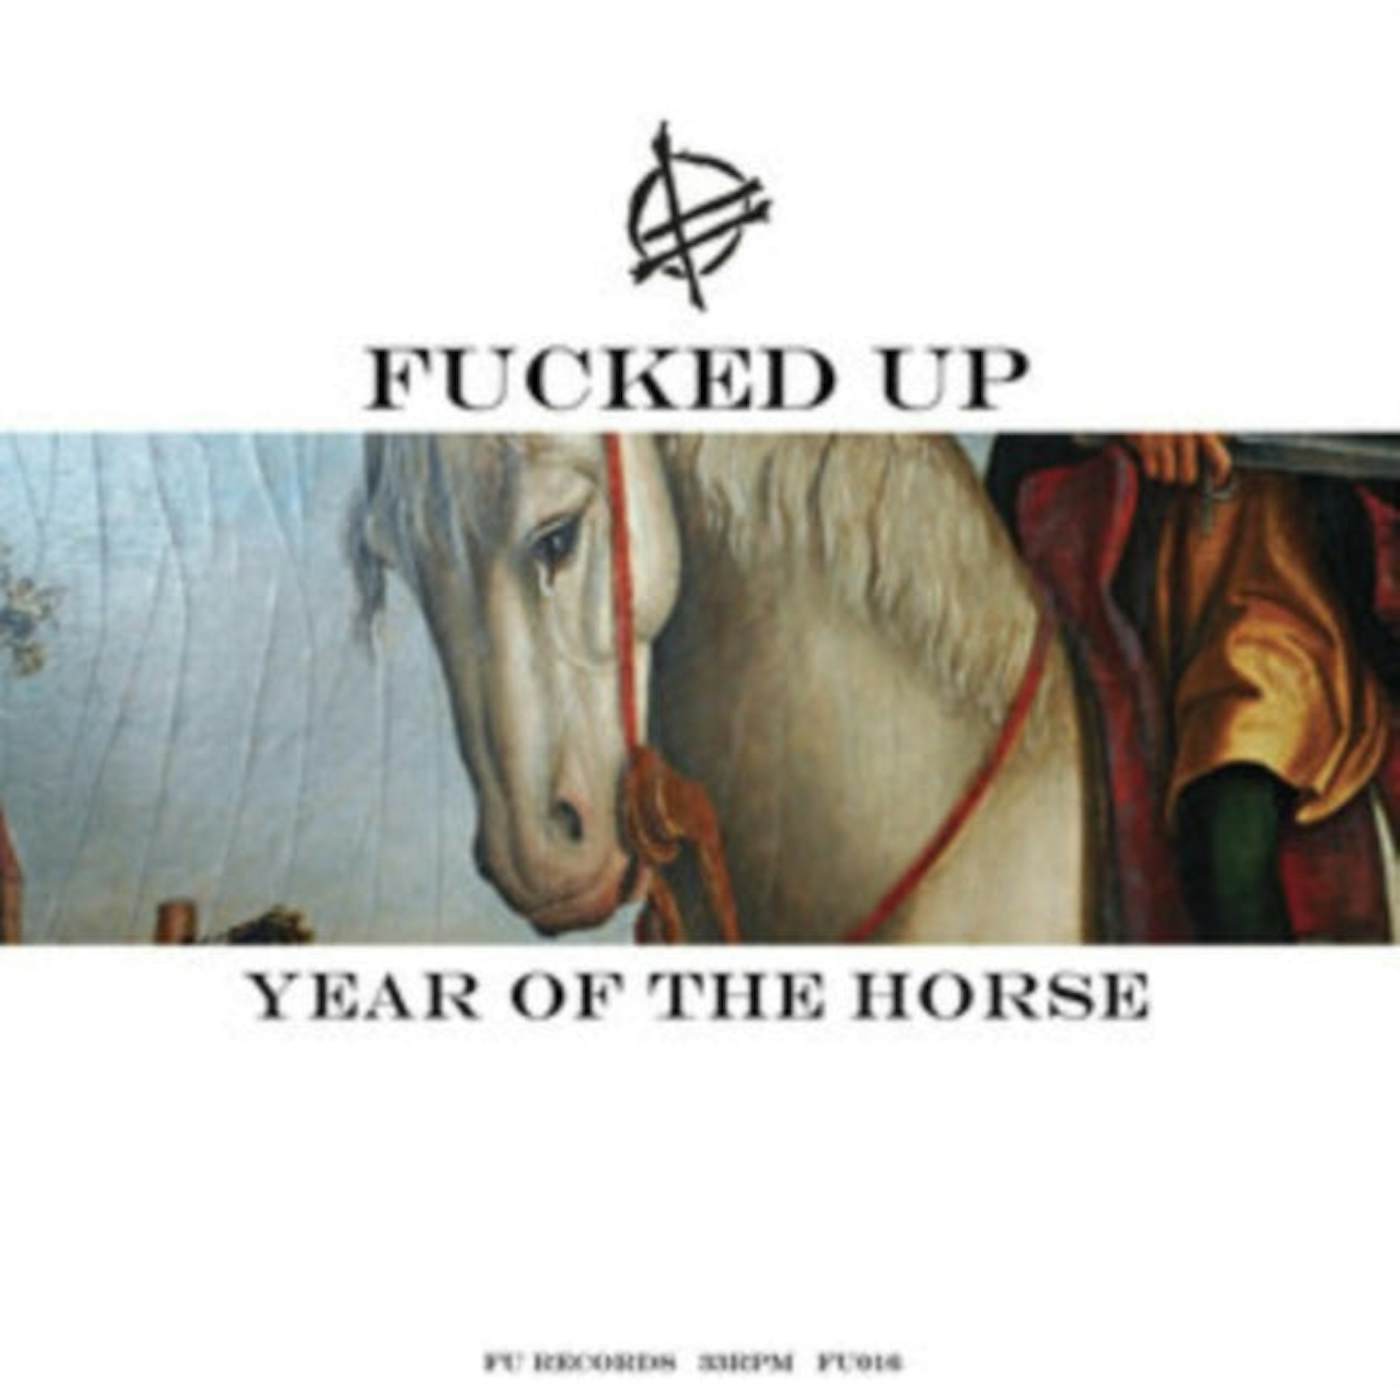 Fucked Up LP - Year Of The Horse (Vinyl)